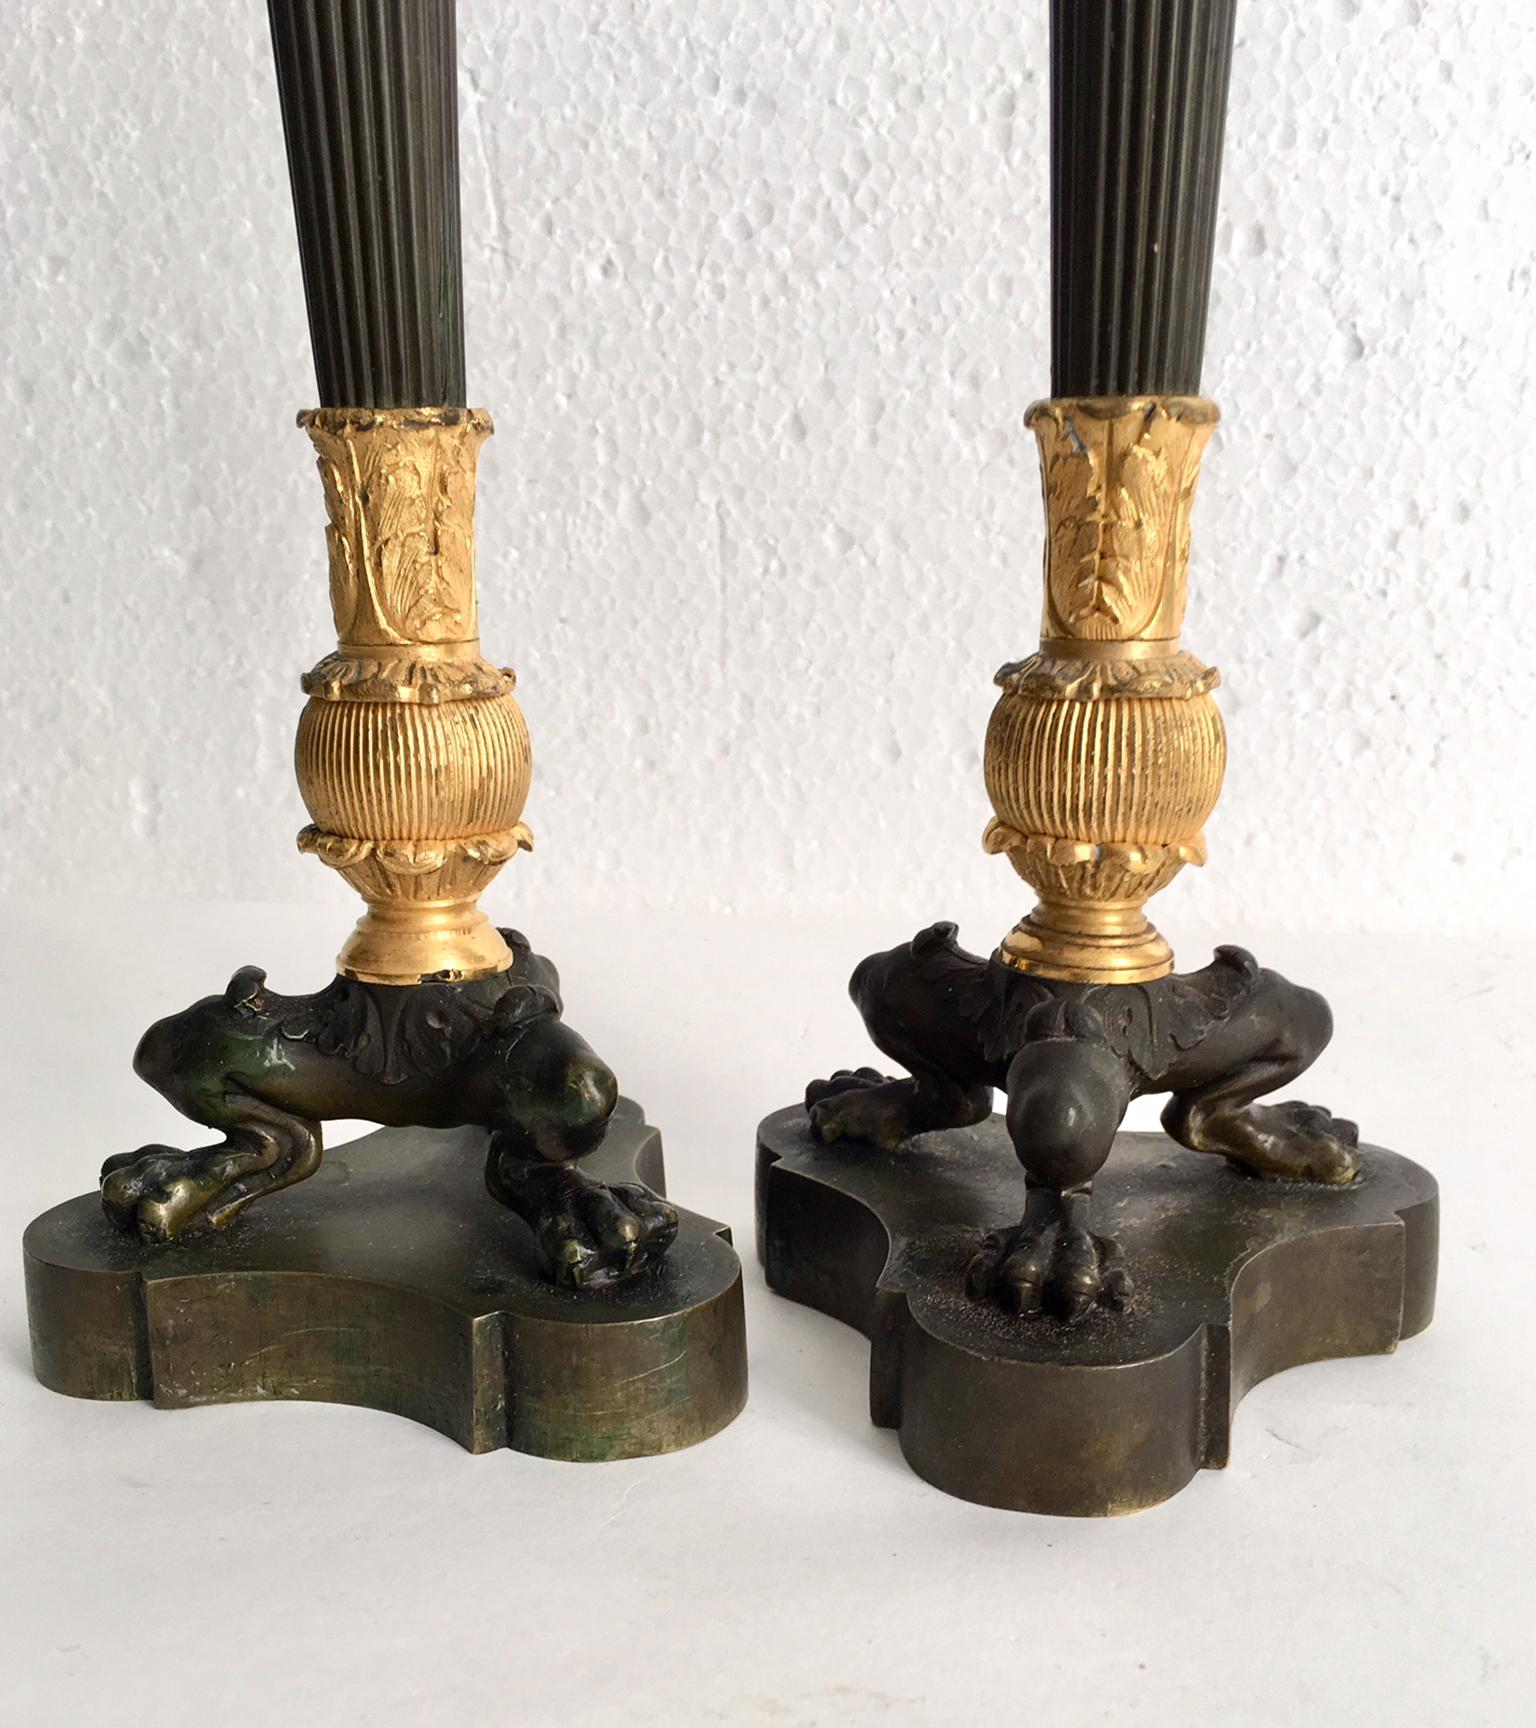 Pair of very elegant French Empire candlestick, classically influenced with fluted columns, and topped with urns, tripod of lion paw feet.